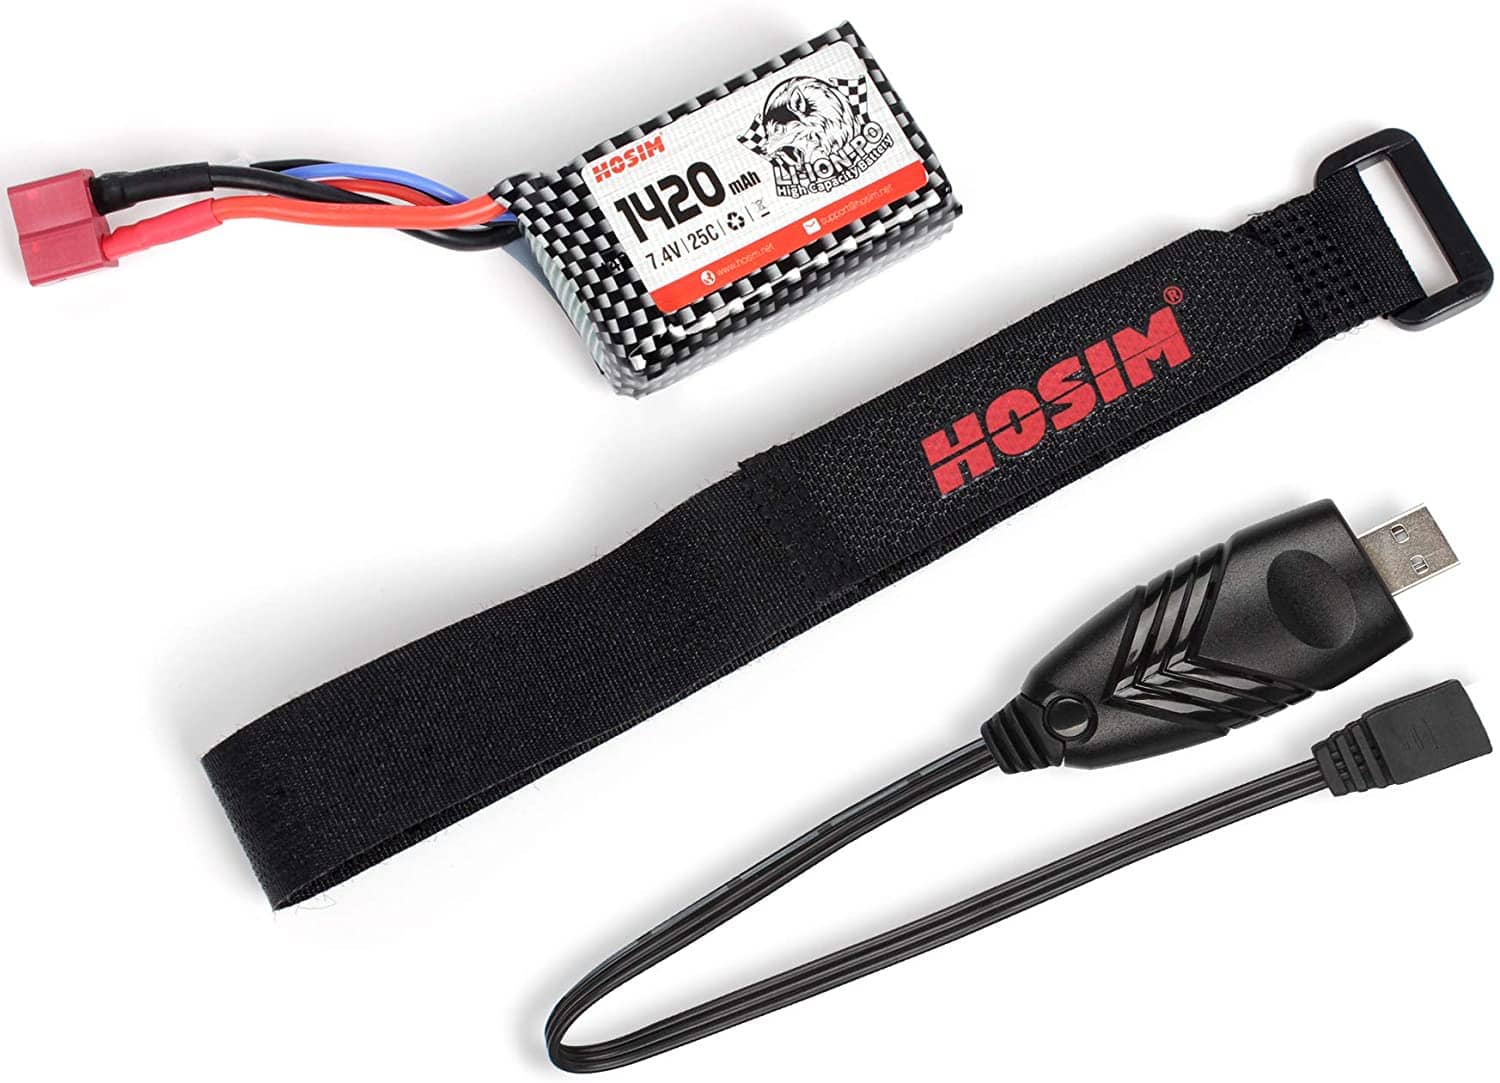 Hosim 7.4V 1420mAh 25C T Connector Li-ion Rechargeable Battery Pack with 1pcs Battery Strap,1pcs 2A-USB,Li-Po Battery for Hosim Brushless Q901 Q903 Q905 Truggy High Speed Truck Accessory Supplies